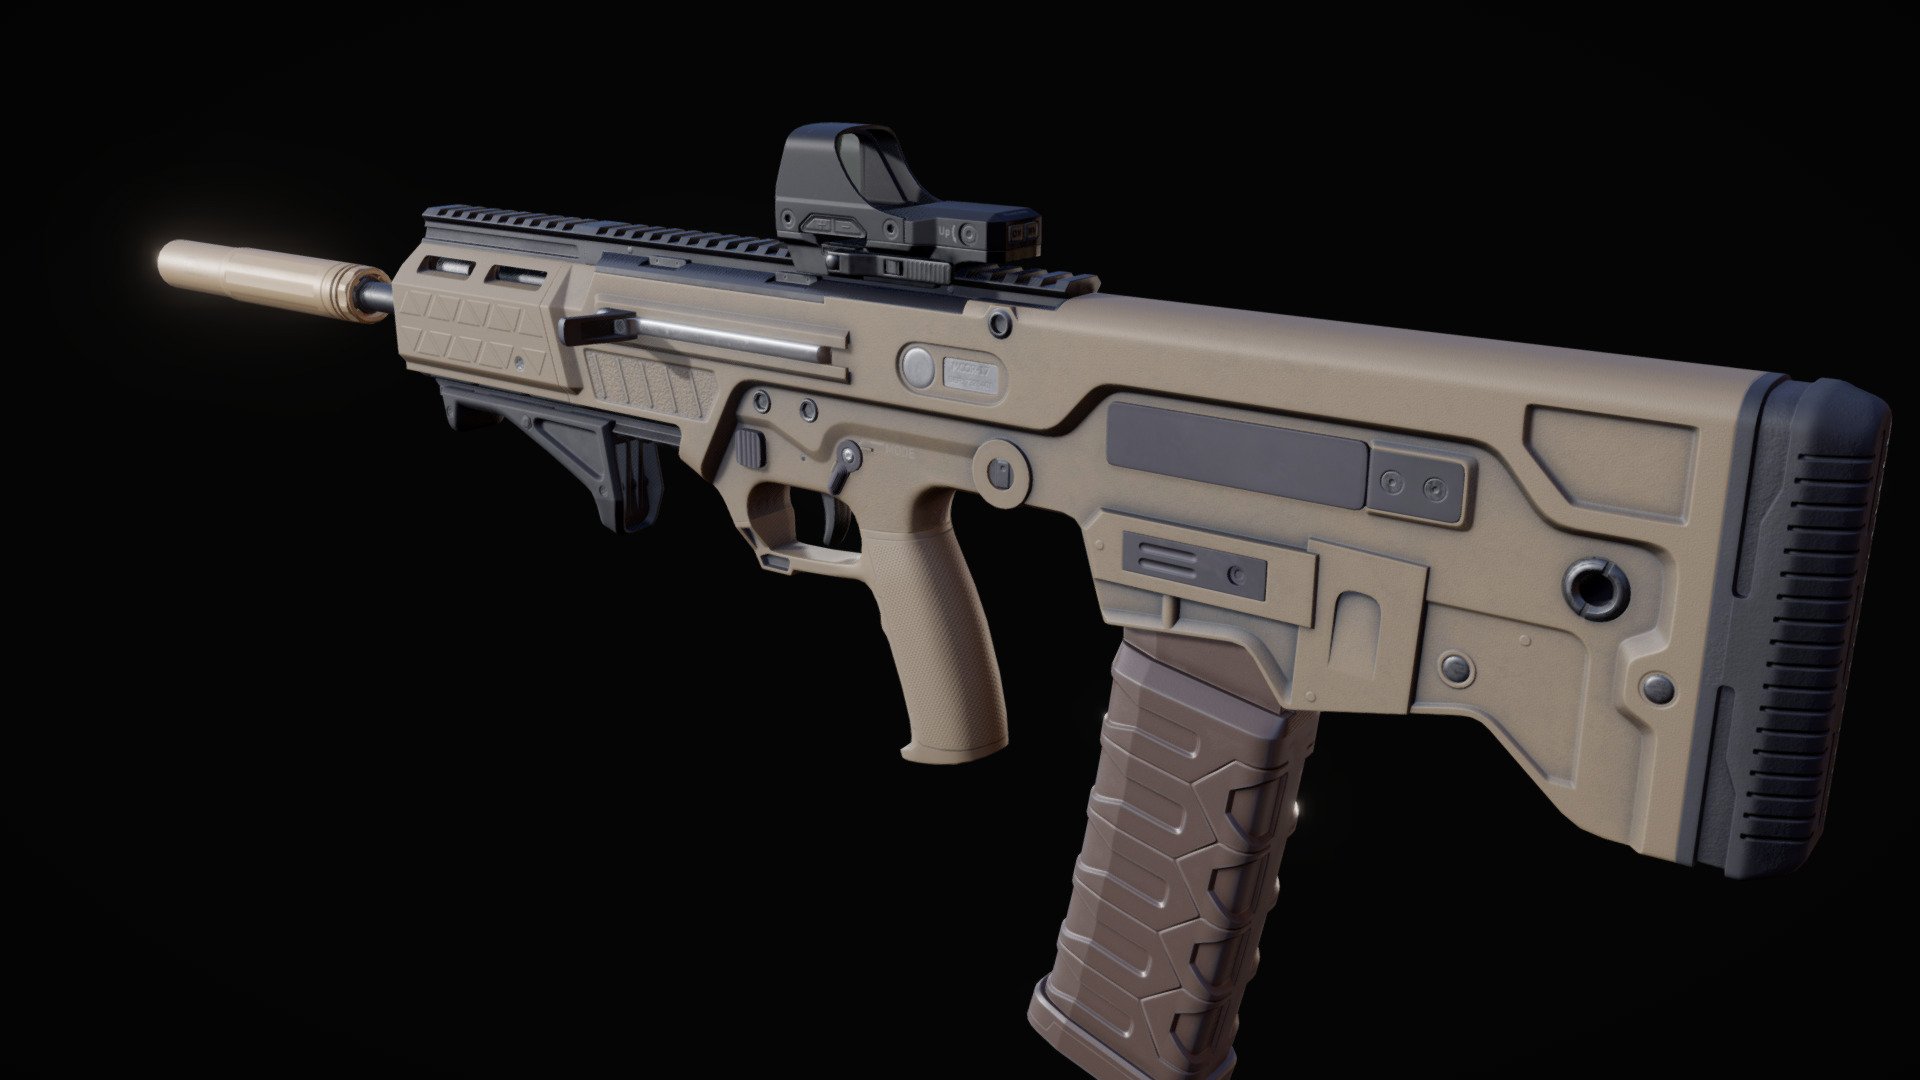 Fiction game-ready customizable assault rifle MCOR-17. Replaceable barrels (with forends), grips, stocks, optional handles, suppressor and cheek rest, various variations of magazines. Available a picatinny rails  for mounting optics, laser pointers, flashlights or foregrip handles. It is also possible to move the charging handle and the cartridge release to opposite sides for left-handers.

Real-world sizes. Optimized for LODs. All models, as well as the company labels used, are fiction and do not require additional licenses.

Parts:

Receiver, grip A, grip B, stock A, stock B, cheek rest, magazine 30, magazine 60, barrel A, barrel B, barrel C, foregrip handle A, foregrip handle B, suppressor, suppressor cover, iron sight, collimator sight, optic sight, 5.56x45 cartridge, 5.56x45 case, 5.56x45 bullet.

Additional archive contains 2 texture packs: Metal-Rough and Spec-Gloss (.png).

For some elements, several skins are available: desert, black, black-green.

 - Customizable assault rifle - 3D model by Ramhat 3d model